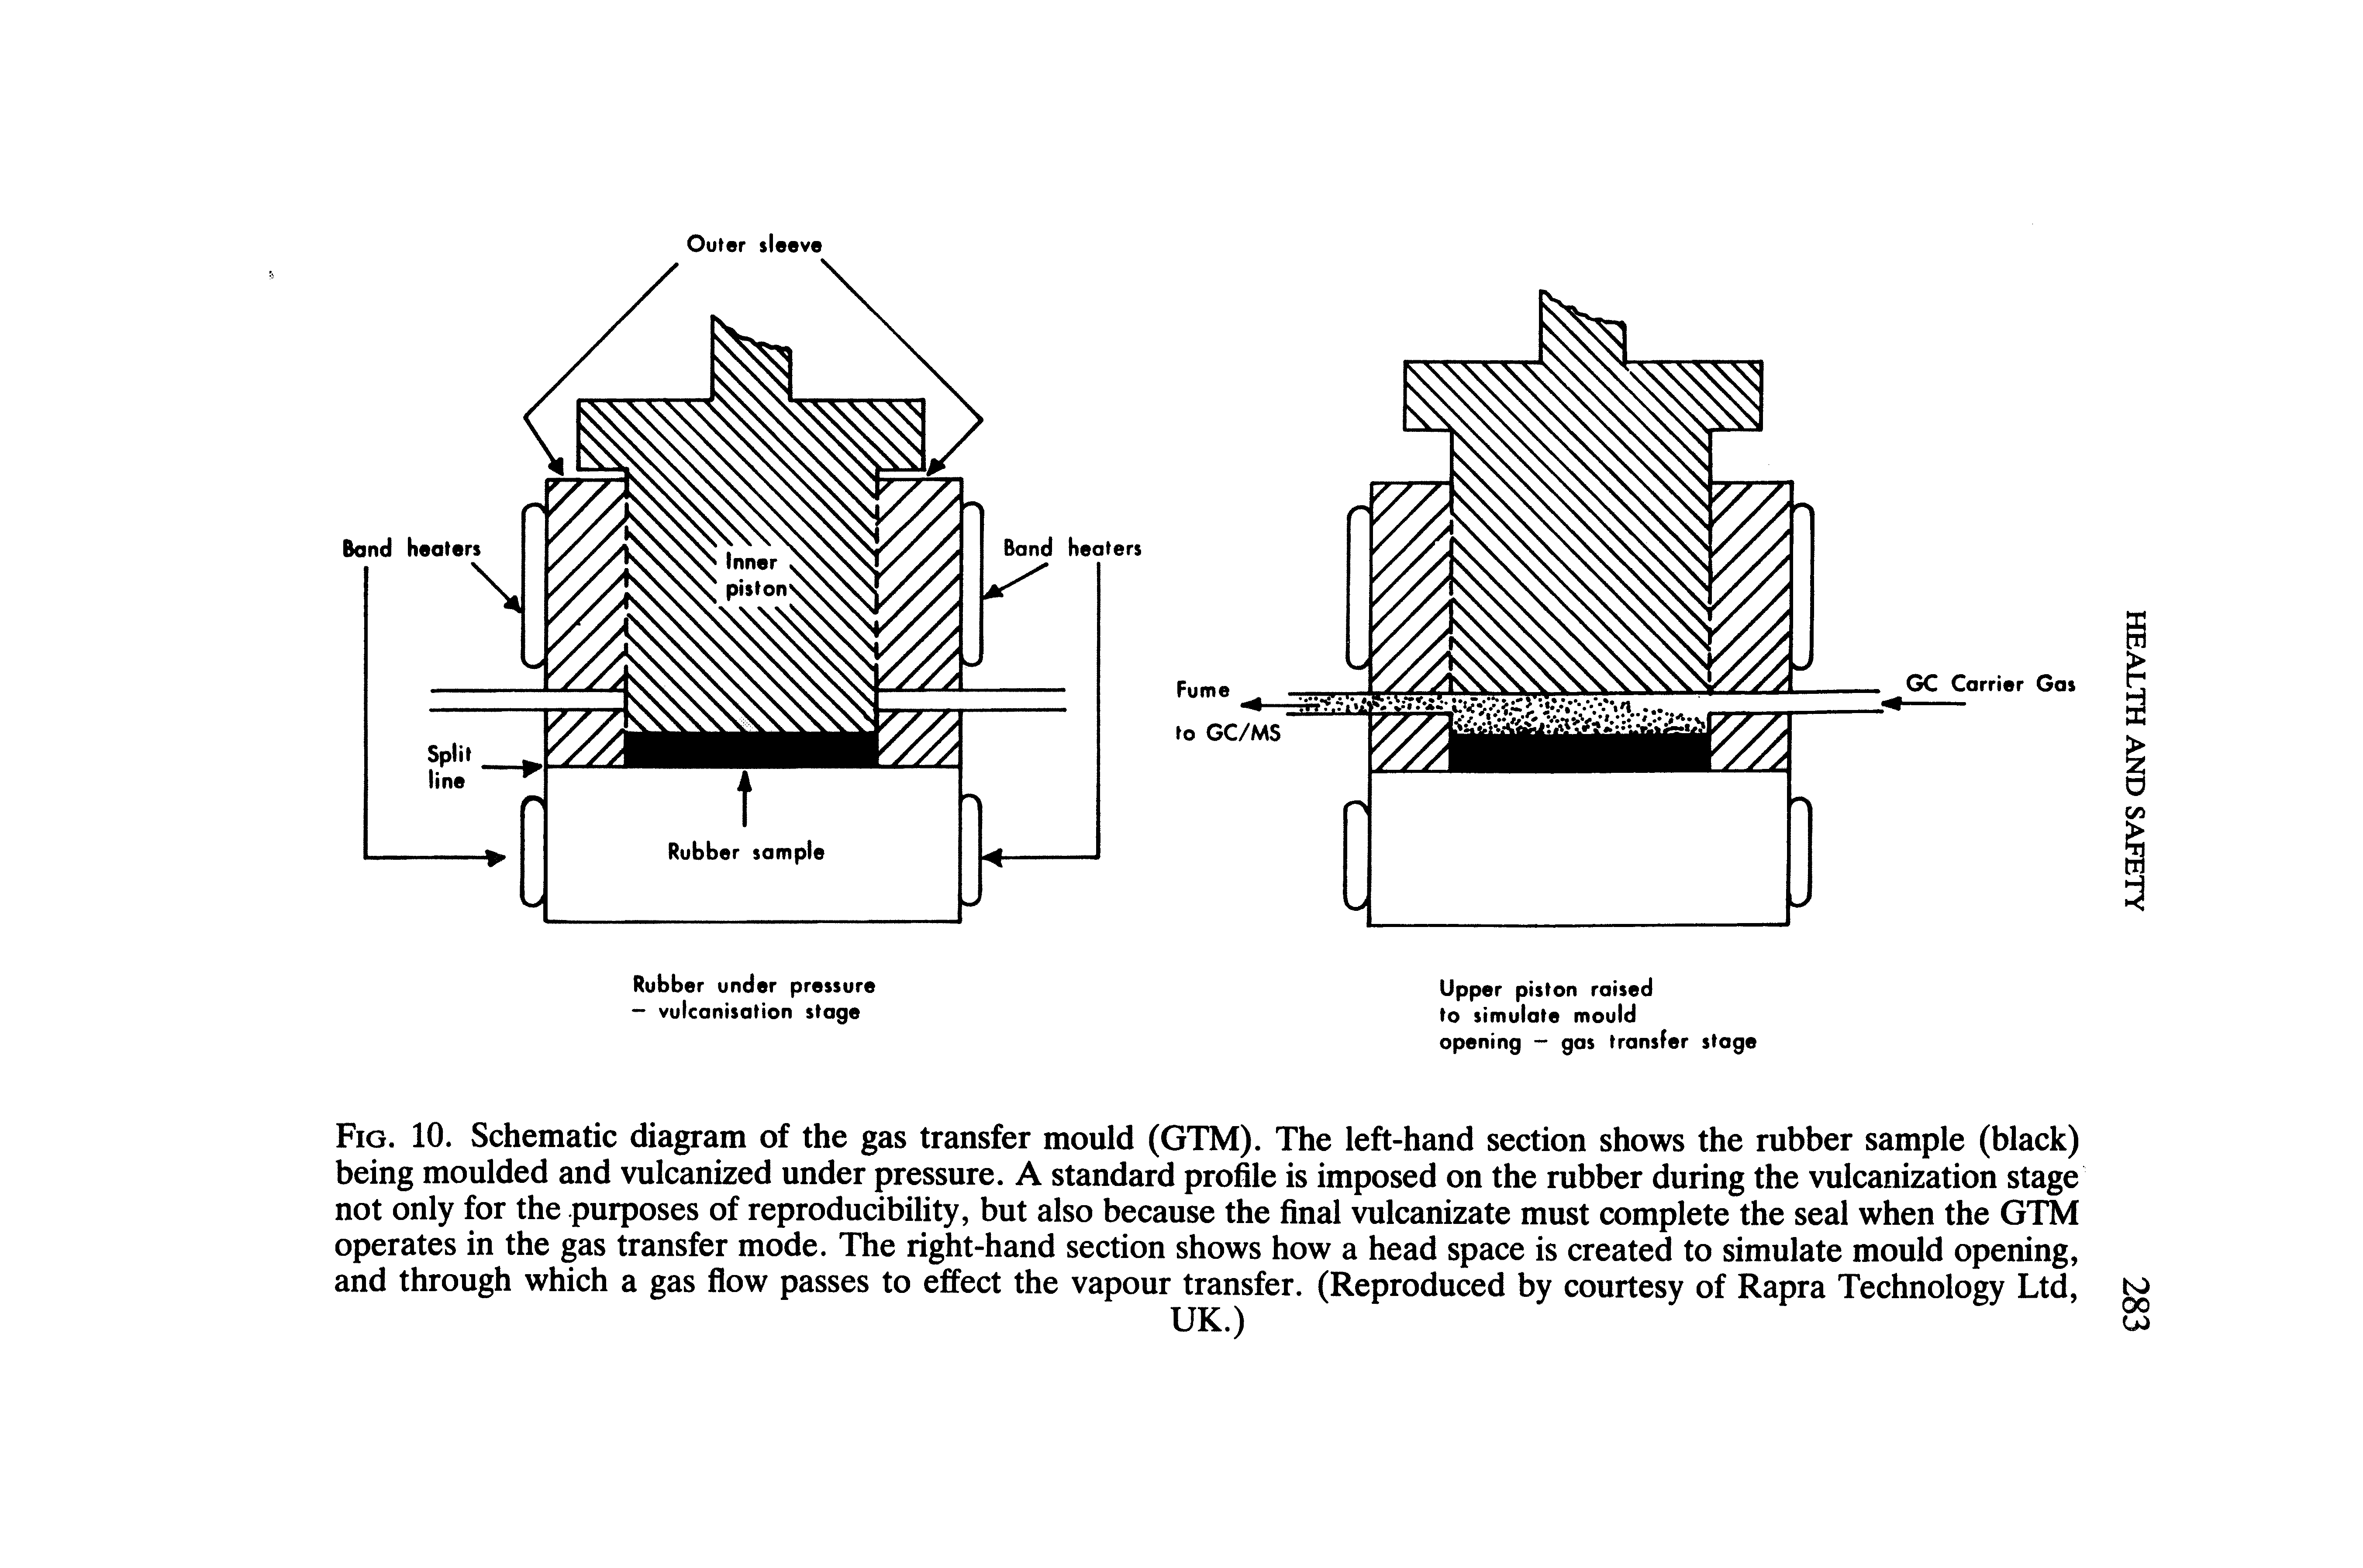 Fig. 10. Schematic diagram of the gas transfer mould (GTM). The left-hand section shows the rubber sample (black) being moulded and vulcanized under pressure. A standard profile is imposed on the rubber during the vulcanization stage not only for the purposes of reproducibility, but also because the final vulcanizate must complete the seal when the GTM operates in the gas transfer mode. The right-hand section shows how a head space is created to simulate mould opening, and through which a gas flow passes to effect the vapour transfer. (Reproduced by courtesy of Rapra Technology Ltd,...